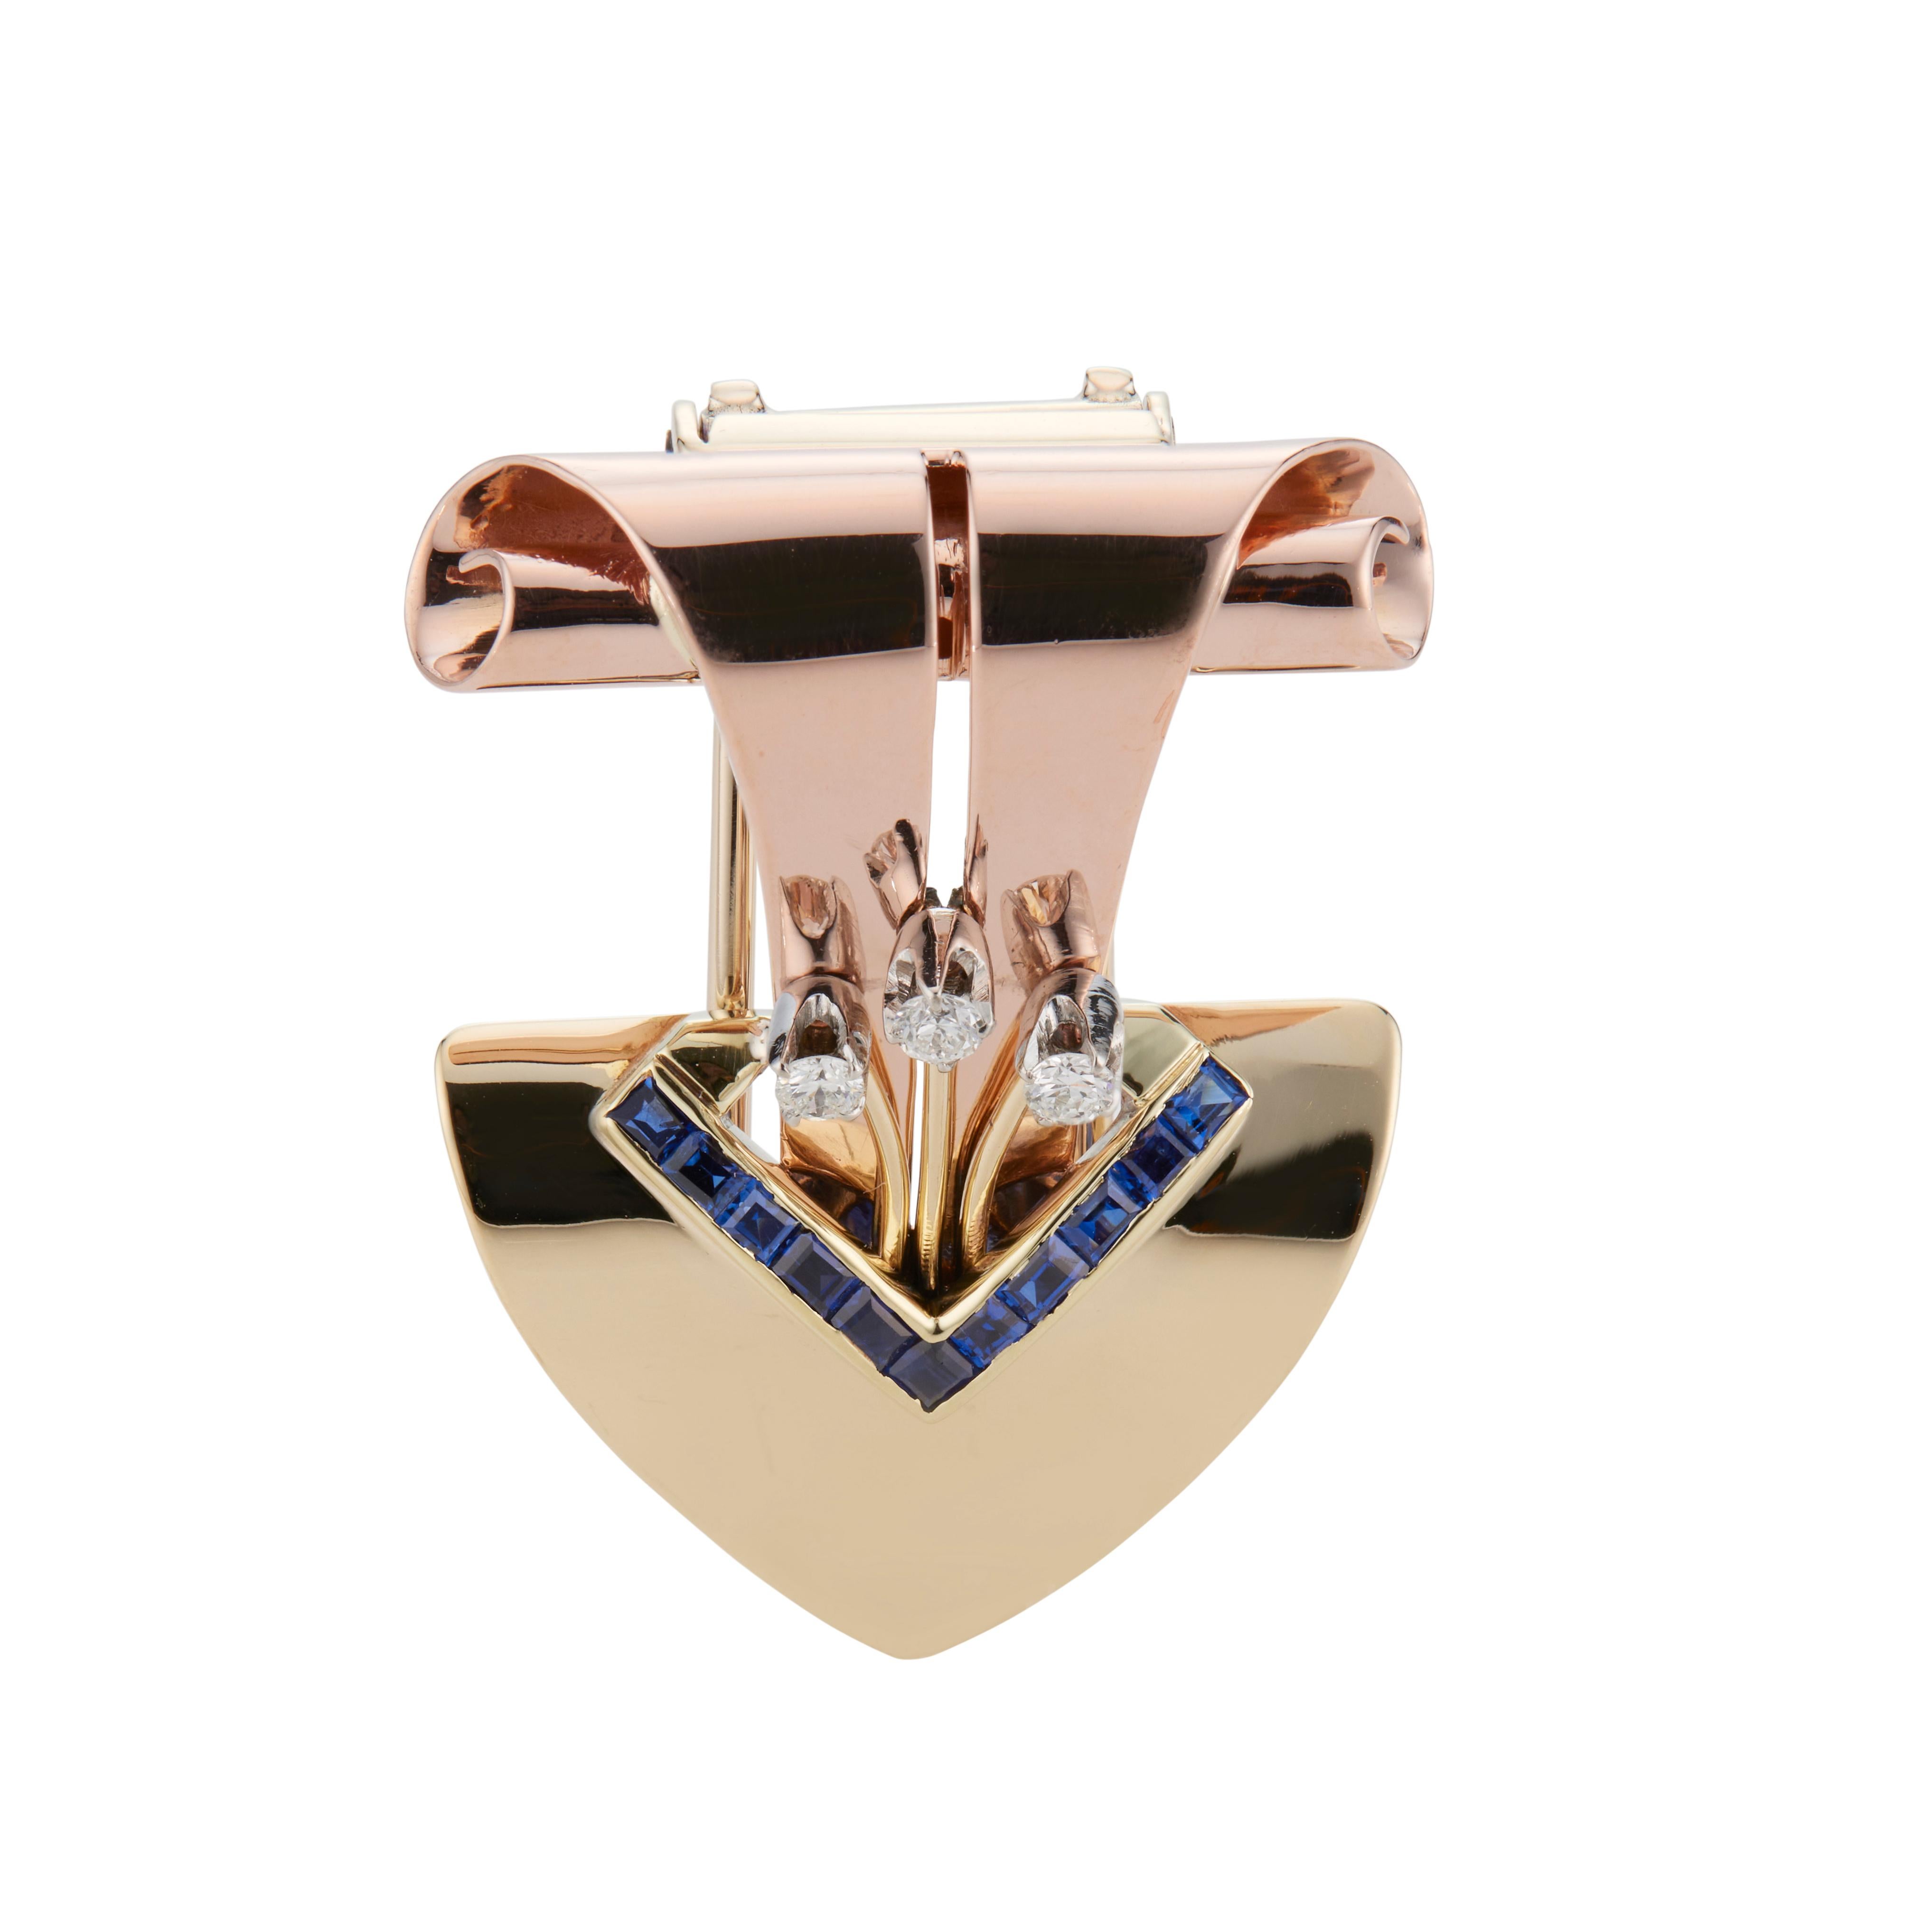 Tiffany & Co. sapphire and diamond brooch. 3 round diamonds set in 14k rose gold with 11 square cut sapphires in a 14k yellow gold bottom. The Tiffany & Co. logo is a bit worn but can seen. 

3 round diamonds, G VS approx. .15cts
11